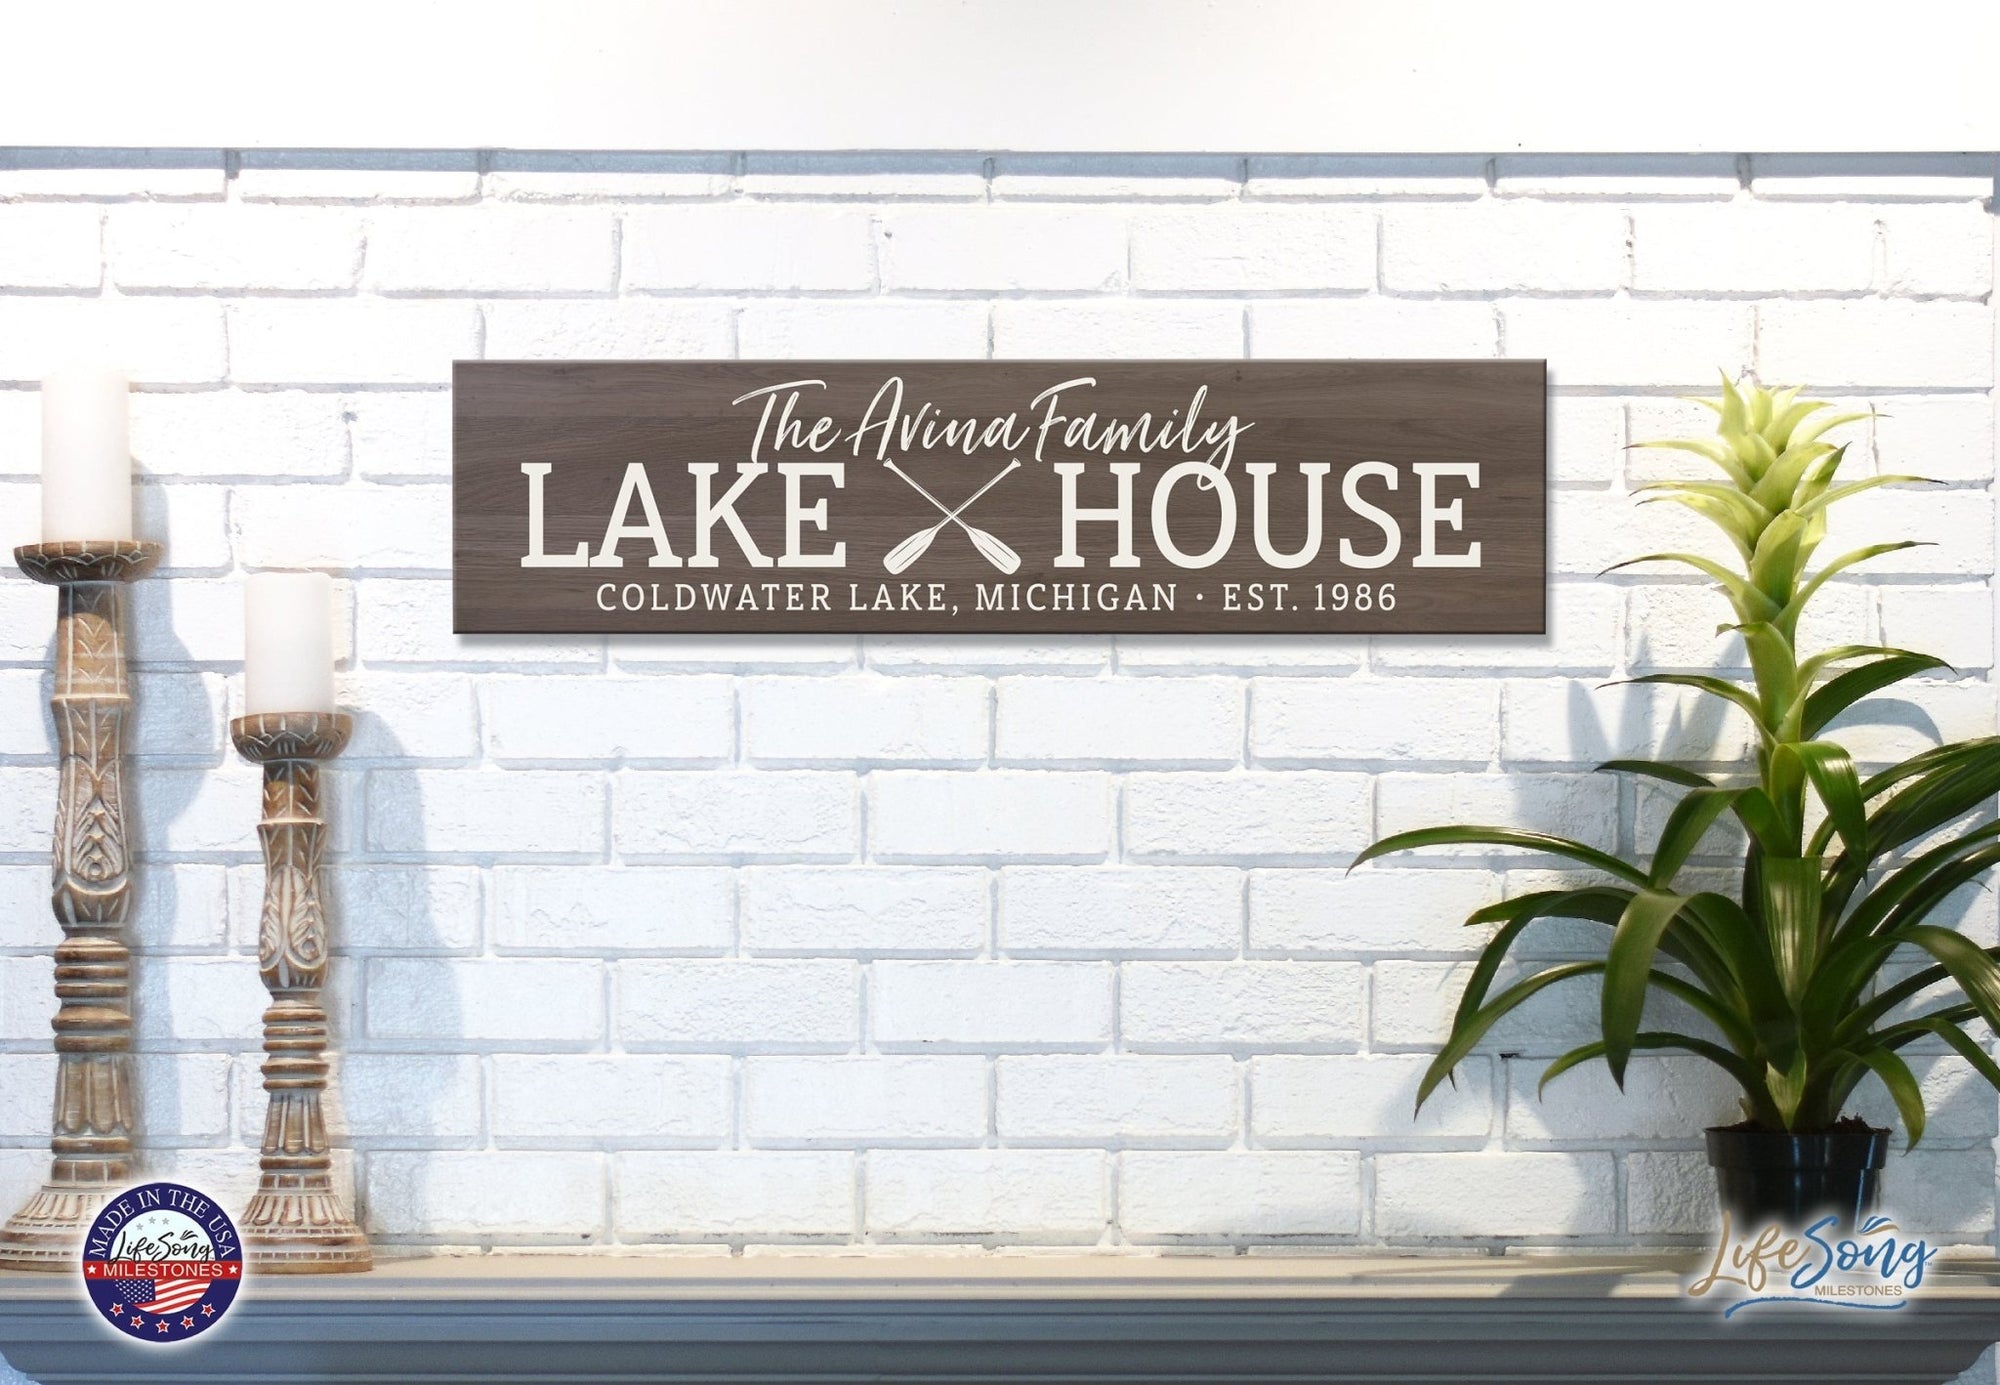 Personalized Inspirational Modern Family Beach House Wooden Wall Plaque 10x40 – Lake House (EST) - LifeSong Milestones